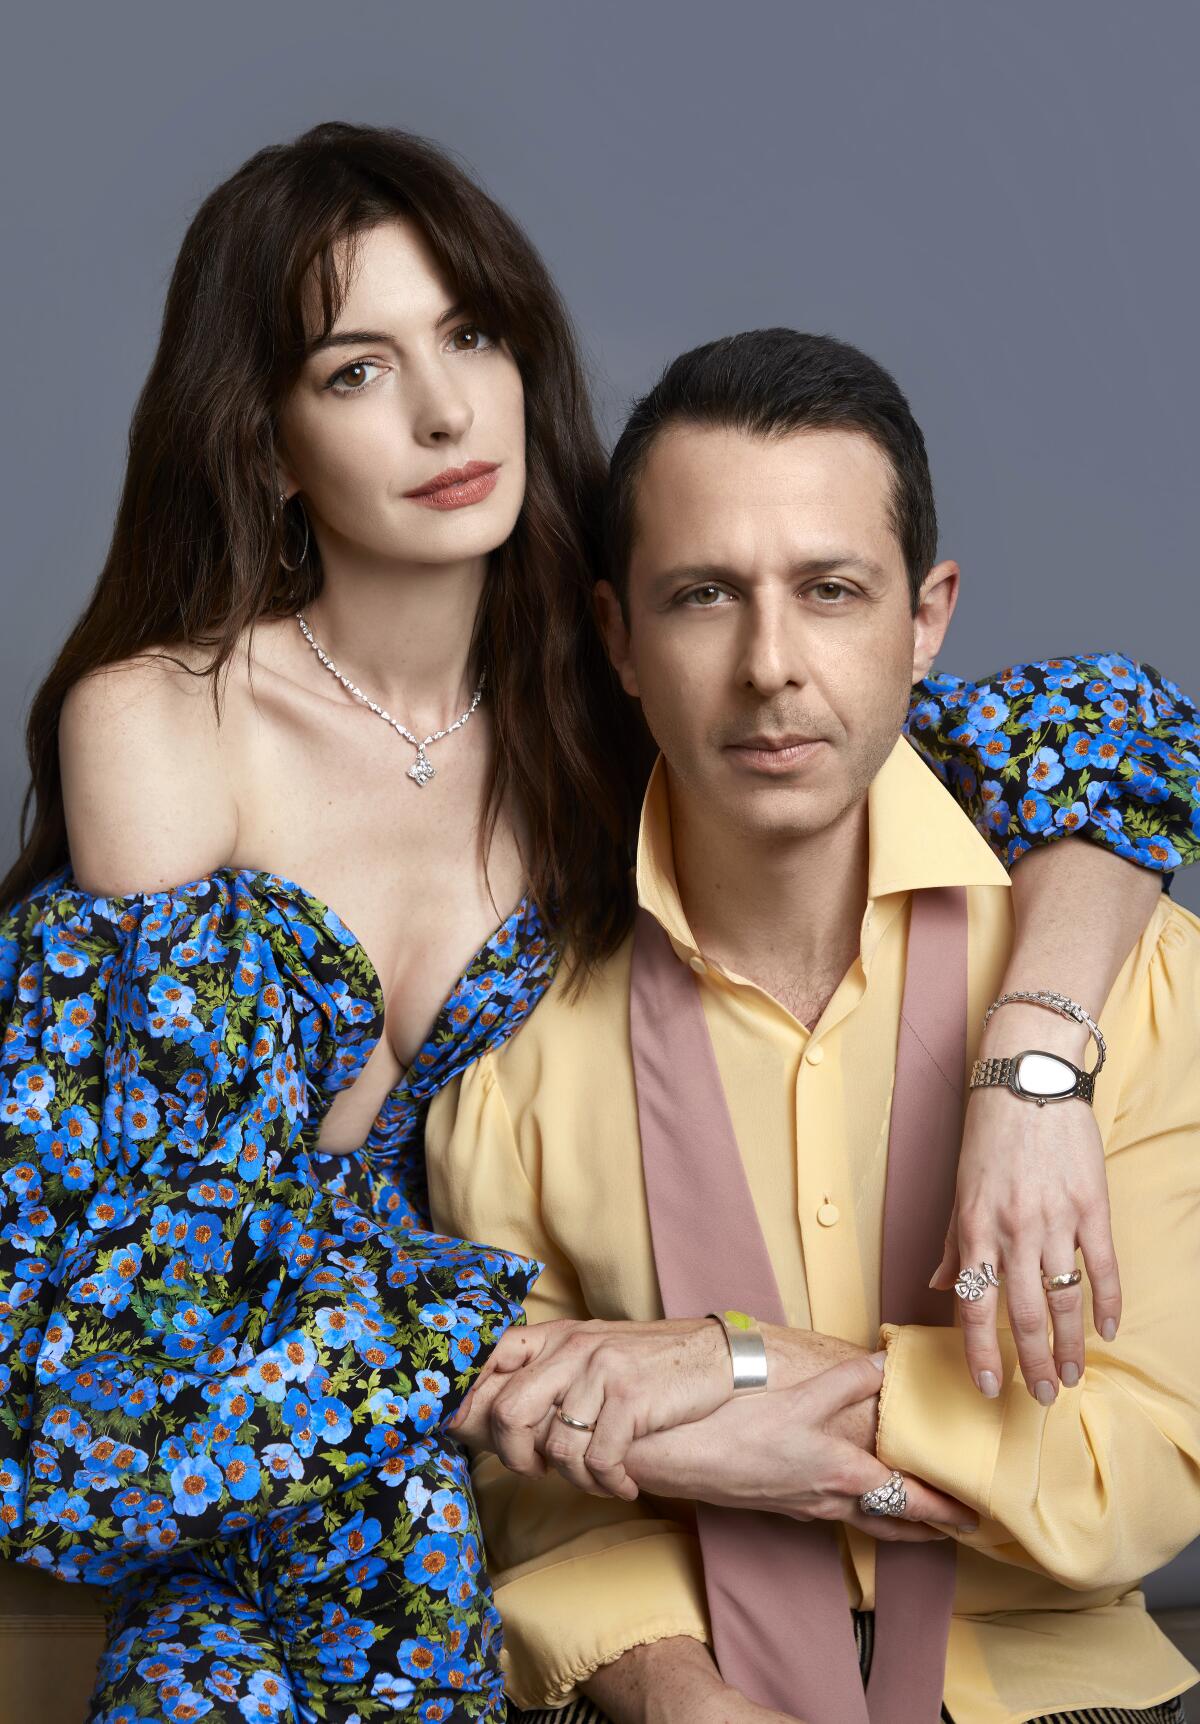 Anne Hathaway in a flowery dress poses for a portrait with her arms around Jeremy Strong.